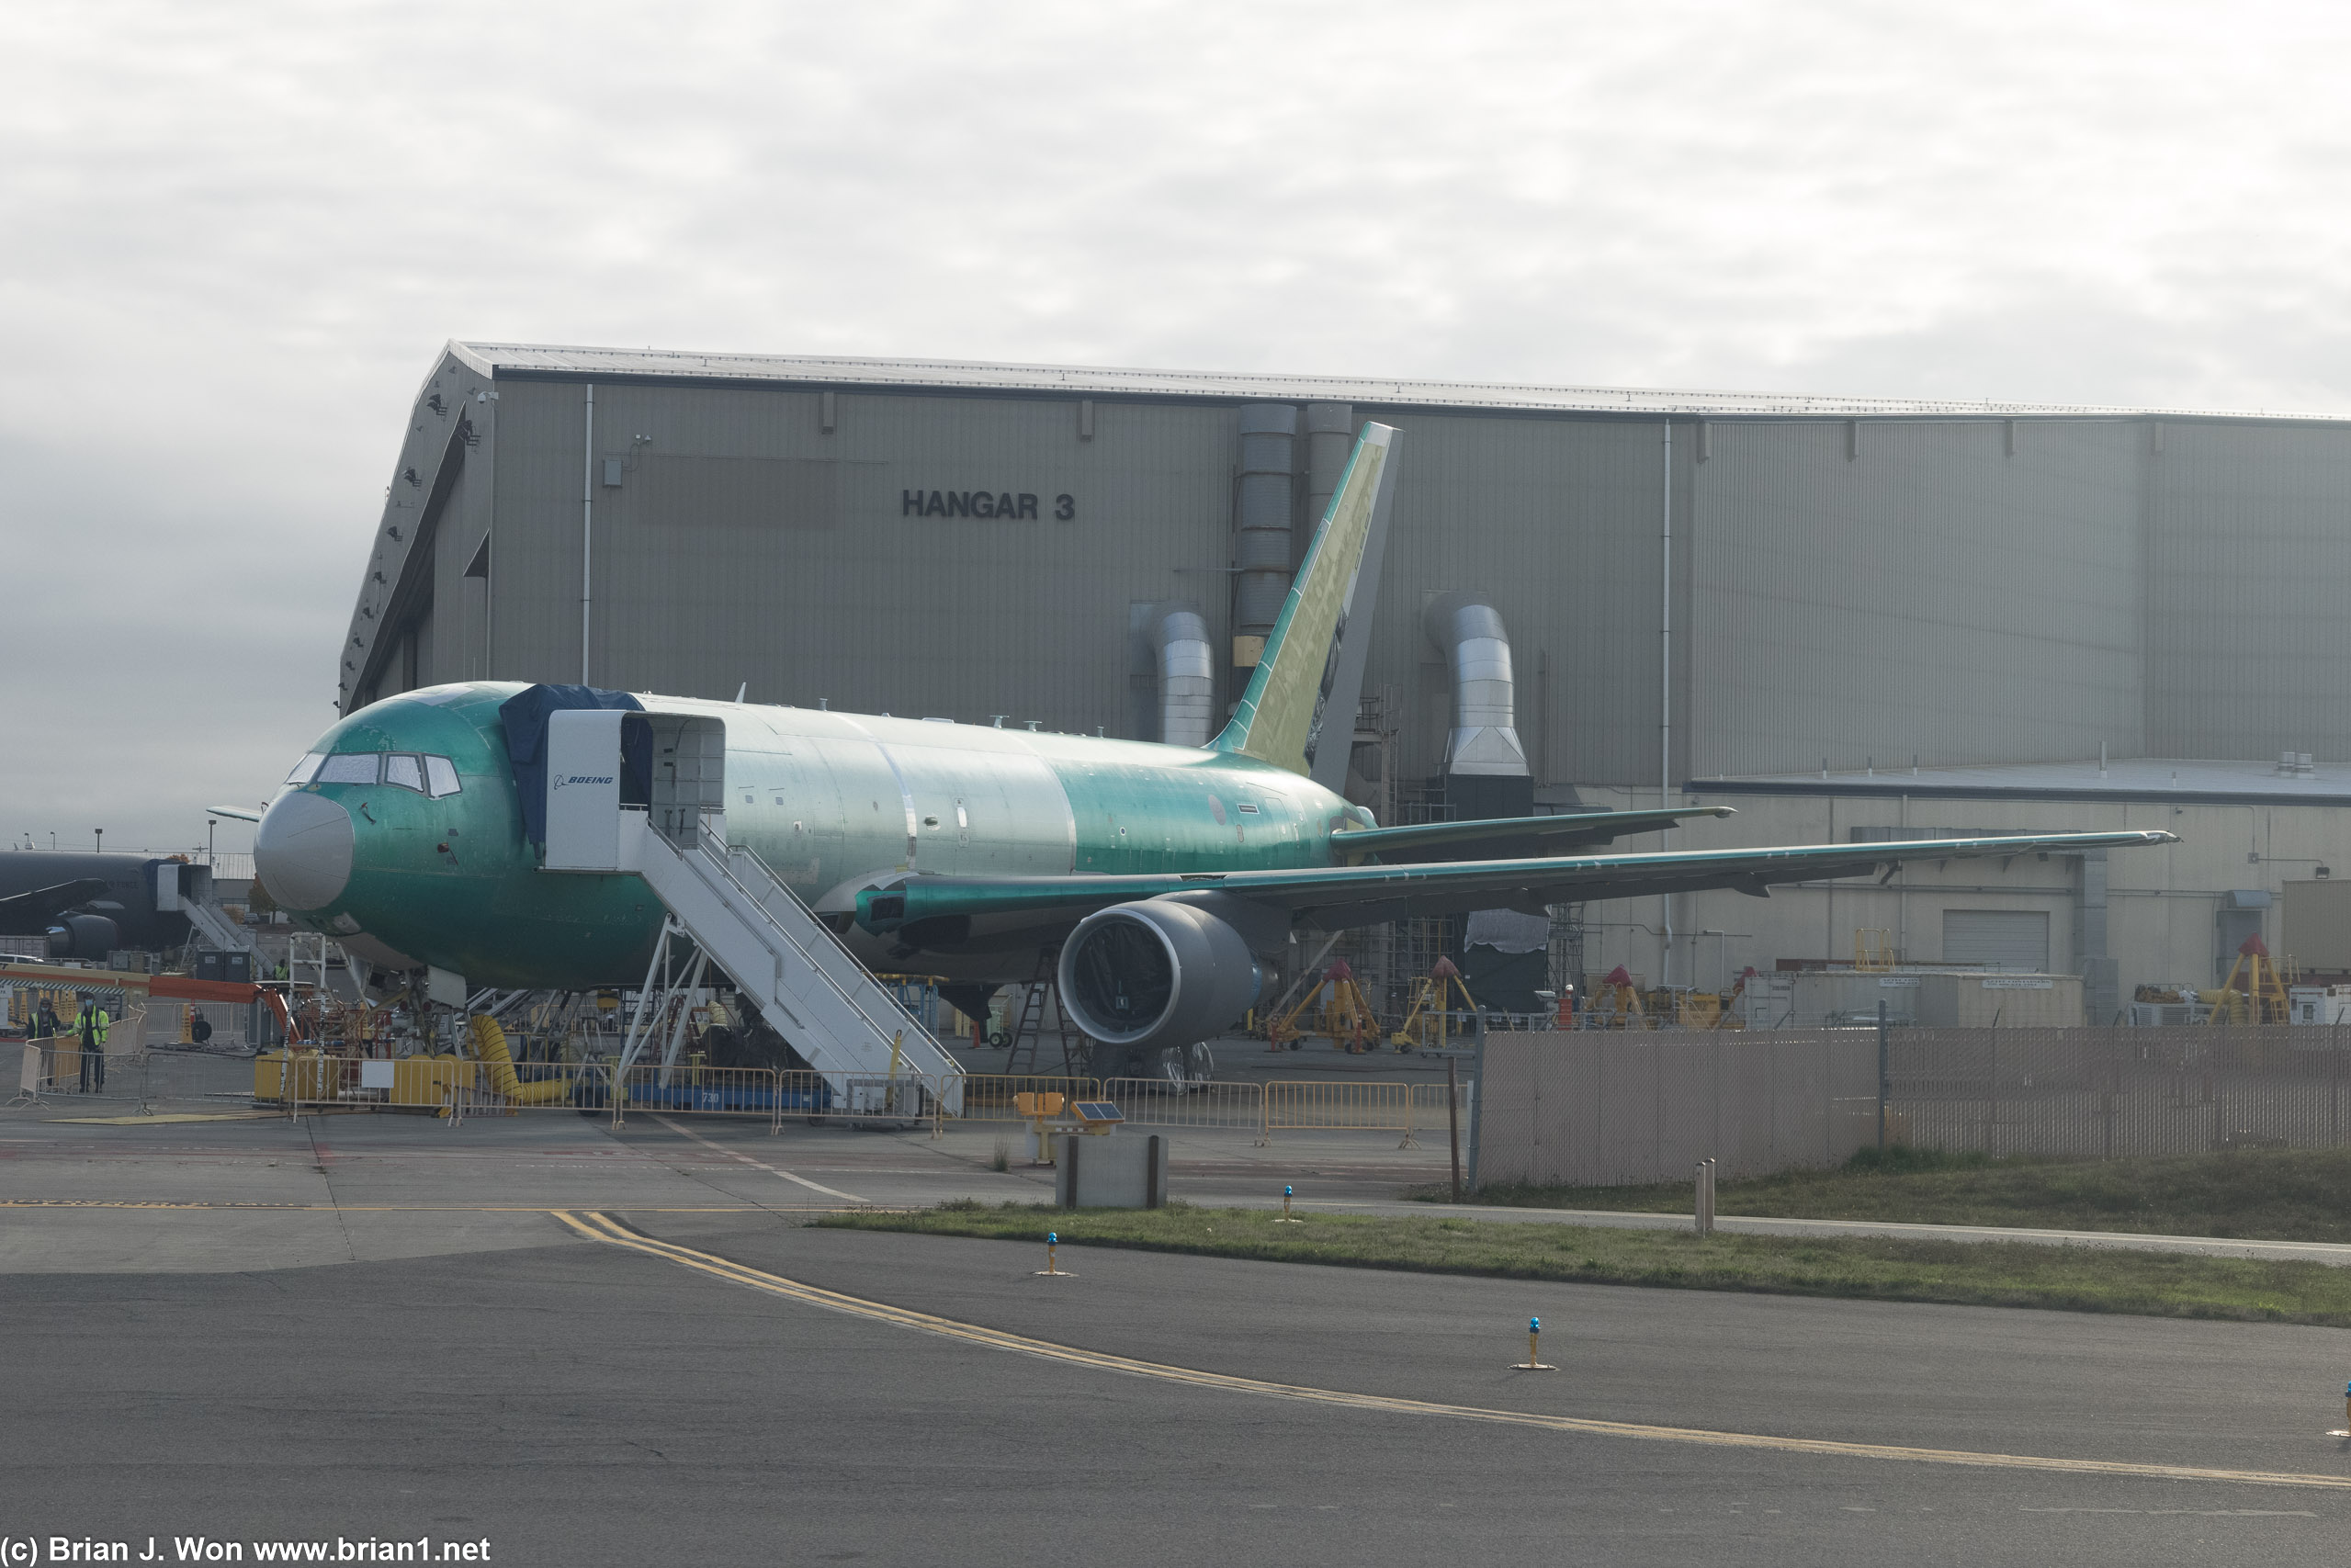 Still surprised the KC-46A doesn't have winglets or raked wingtips.